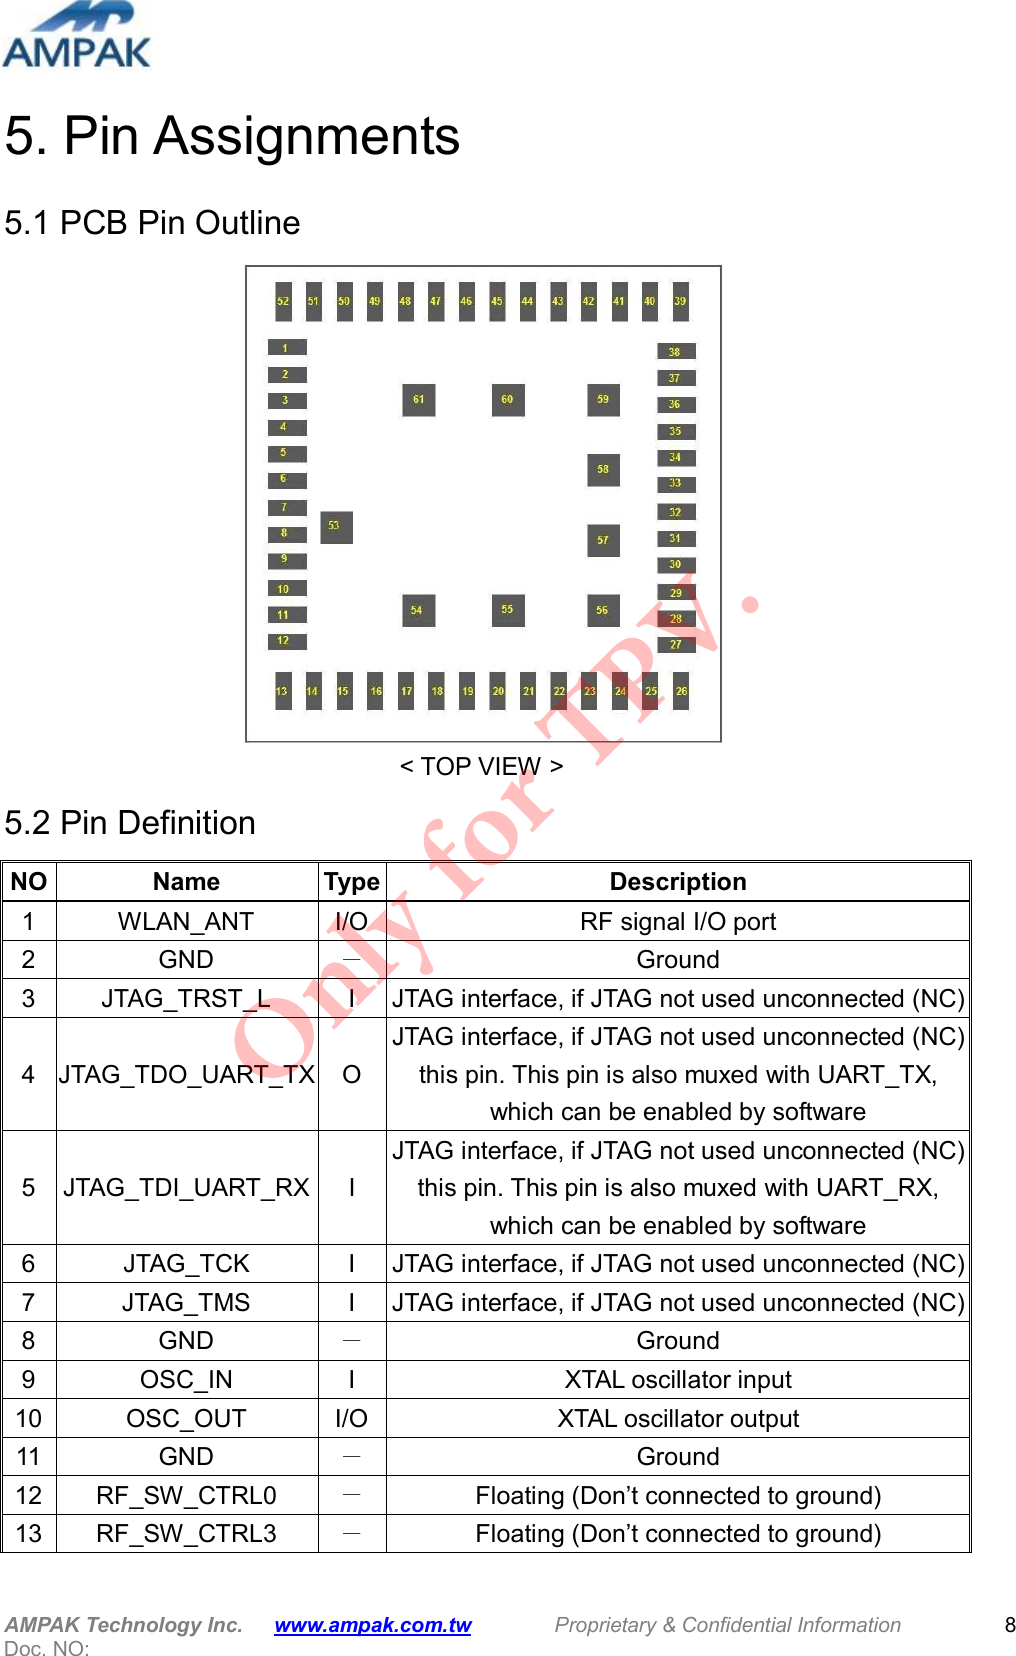  AMPAK Technology Inc.      www.ampak.com.tw        Proprietary &amp; Confidential Information       Doc. NO:   8 5. Pin Assignments 5.1 PCB Pin Outline  &lt; TOP VIEW &gt; 5.2 Pin Definition NO Name Type Description 1 WLAN_ANT I/O RF signal I/O port 2 GND  －  Ground 3 JTAG_TRST_L  I JTAG interface, if JTAG not used unconnected (NC) 4 JTAG_TDO_UART_TX O JTAG interface, if JTAG not used unconnected (NC) this pin. This pin is also muxed with UART_TX, which can be enabled by software 5 JTAG_TDI_UART_RX I JTAG interface, if JTAG not used unconnected (NC) this pin. This pin is also muxed with UART_RX, which can be enabled by software 6 JTAG_TCK  I JTAG interface, if JTAG not used unconnected (NC) 7 JTAG_TMS  I JTAG interface, if JTAG not used unconnected (NC) 8 GND  －  Ground 9 OSC_IN  I XTAL oscillator input 10 OSC_OUT  I/O XTAL oscillator output 11 GND  －  Ground 12 RF_SW_CTRL0  －  Floating (Don’t connected to ground) 13 RF_SW_CTRL3  －  Floating (Don’t connected to ground) Only for TPV.